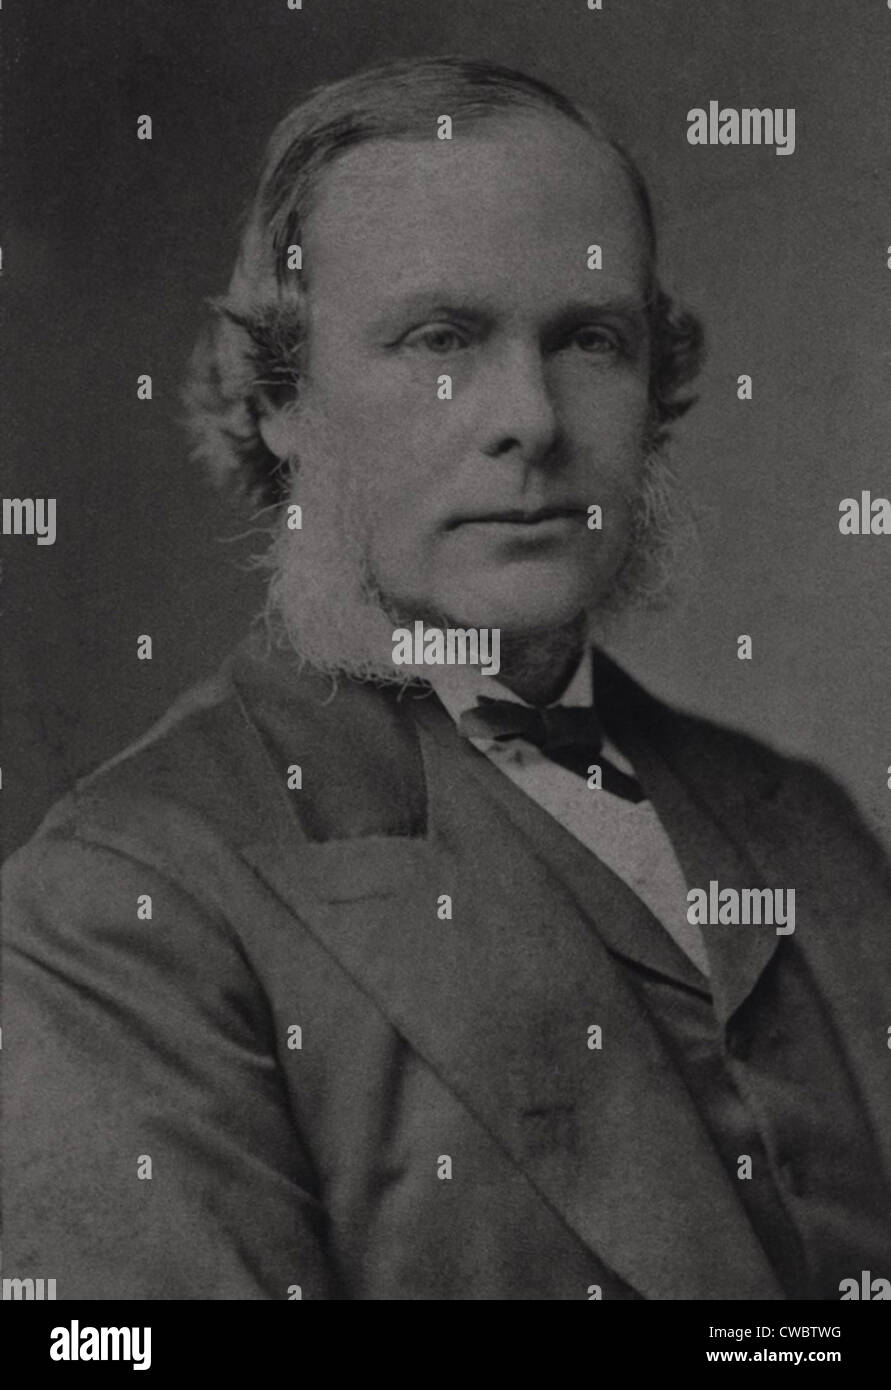 Joseph Lister, (1827-1912), British surgeon and medical scientist who was the founder of antiseptic surgery. Ca. 1870. Stock Photo